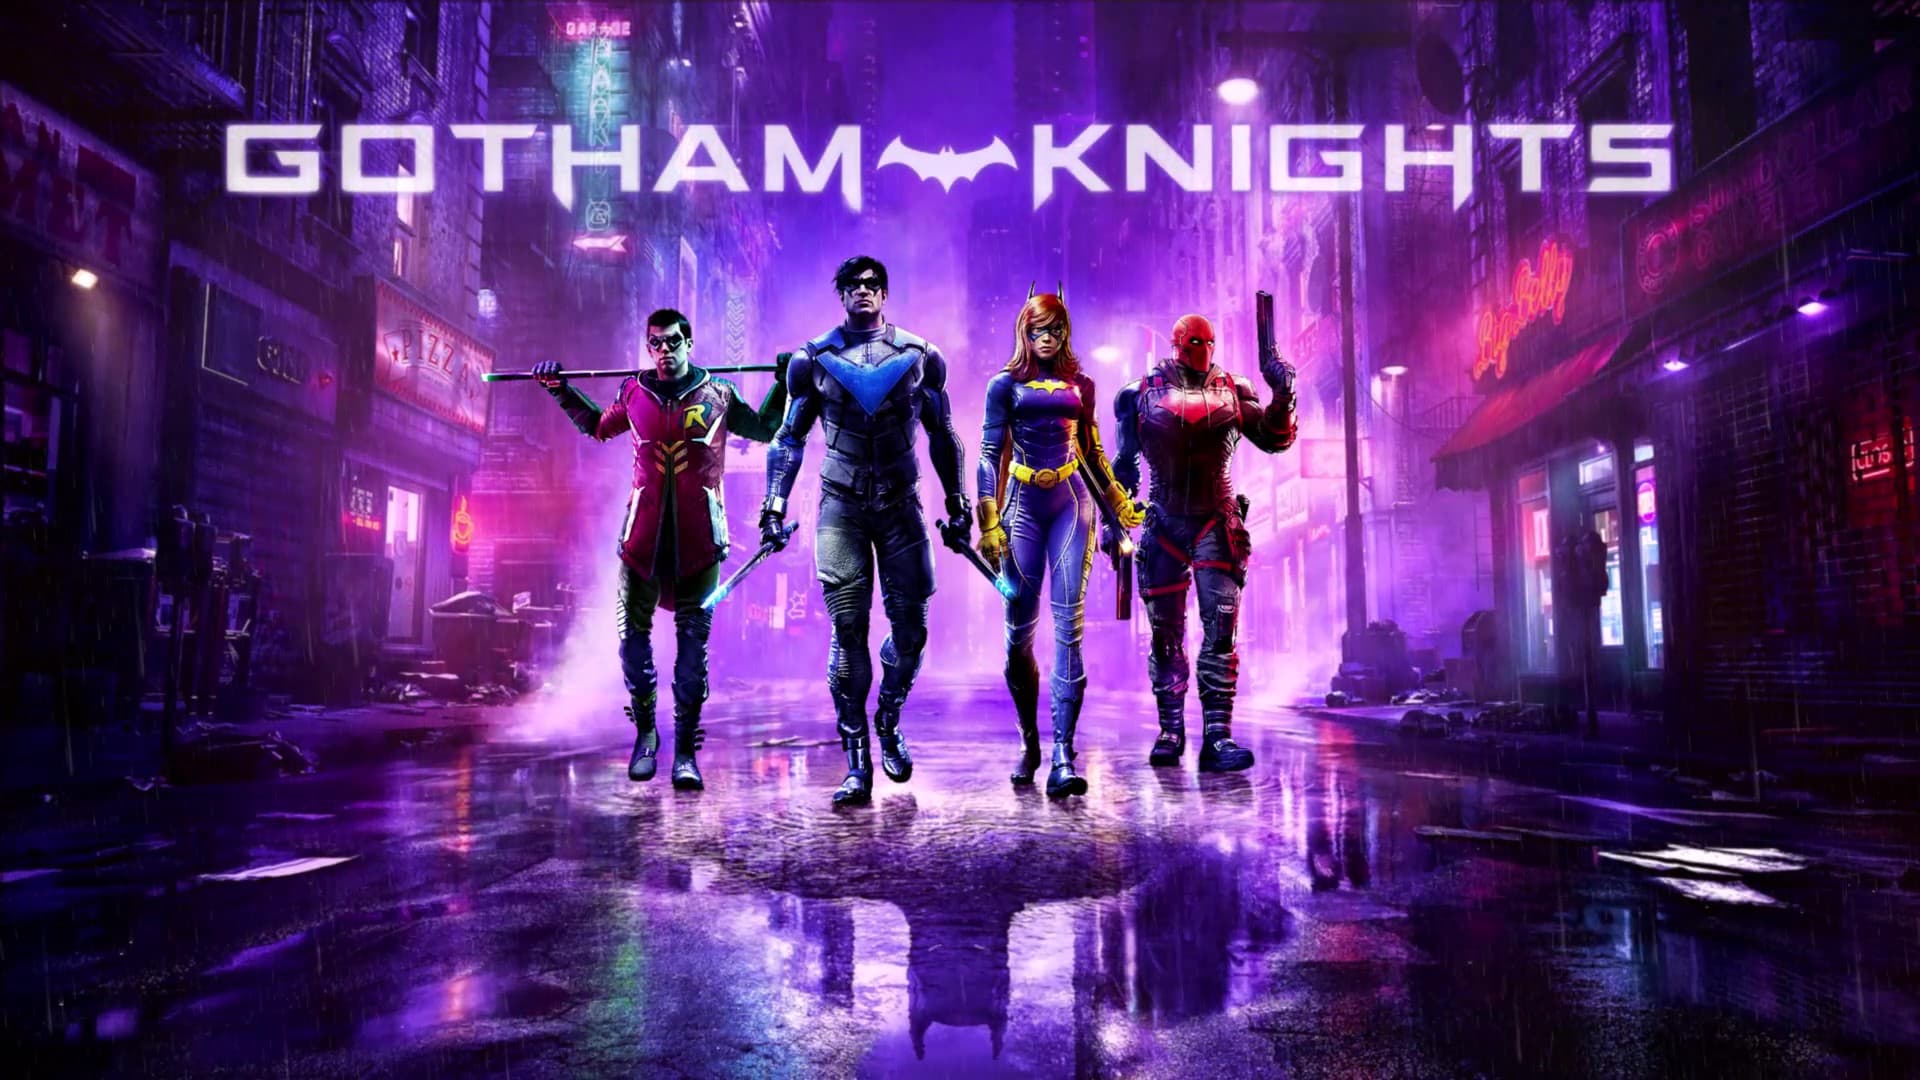 Gotham Knights Live Wallpaper For PC by Favorisxp on DeviantArt